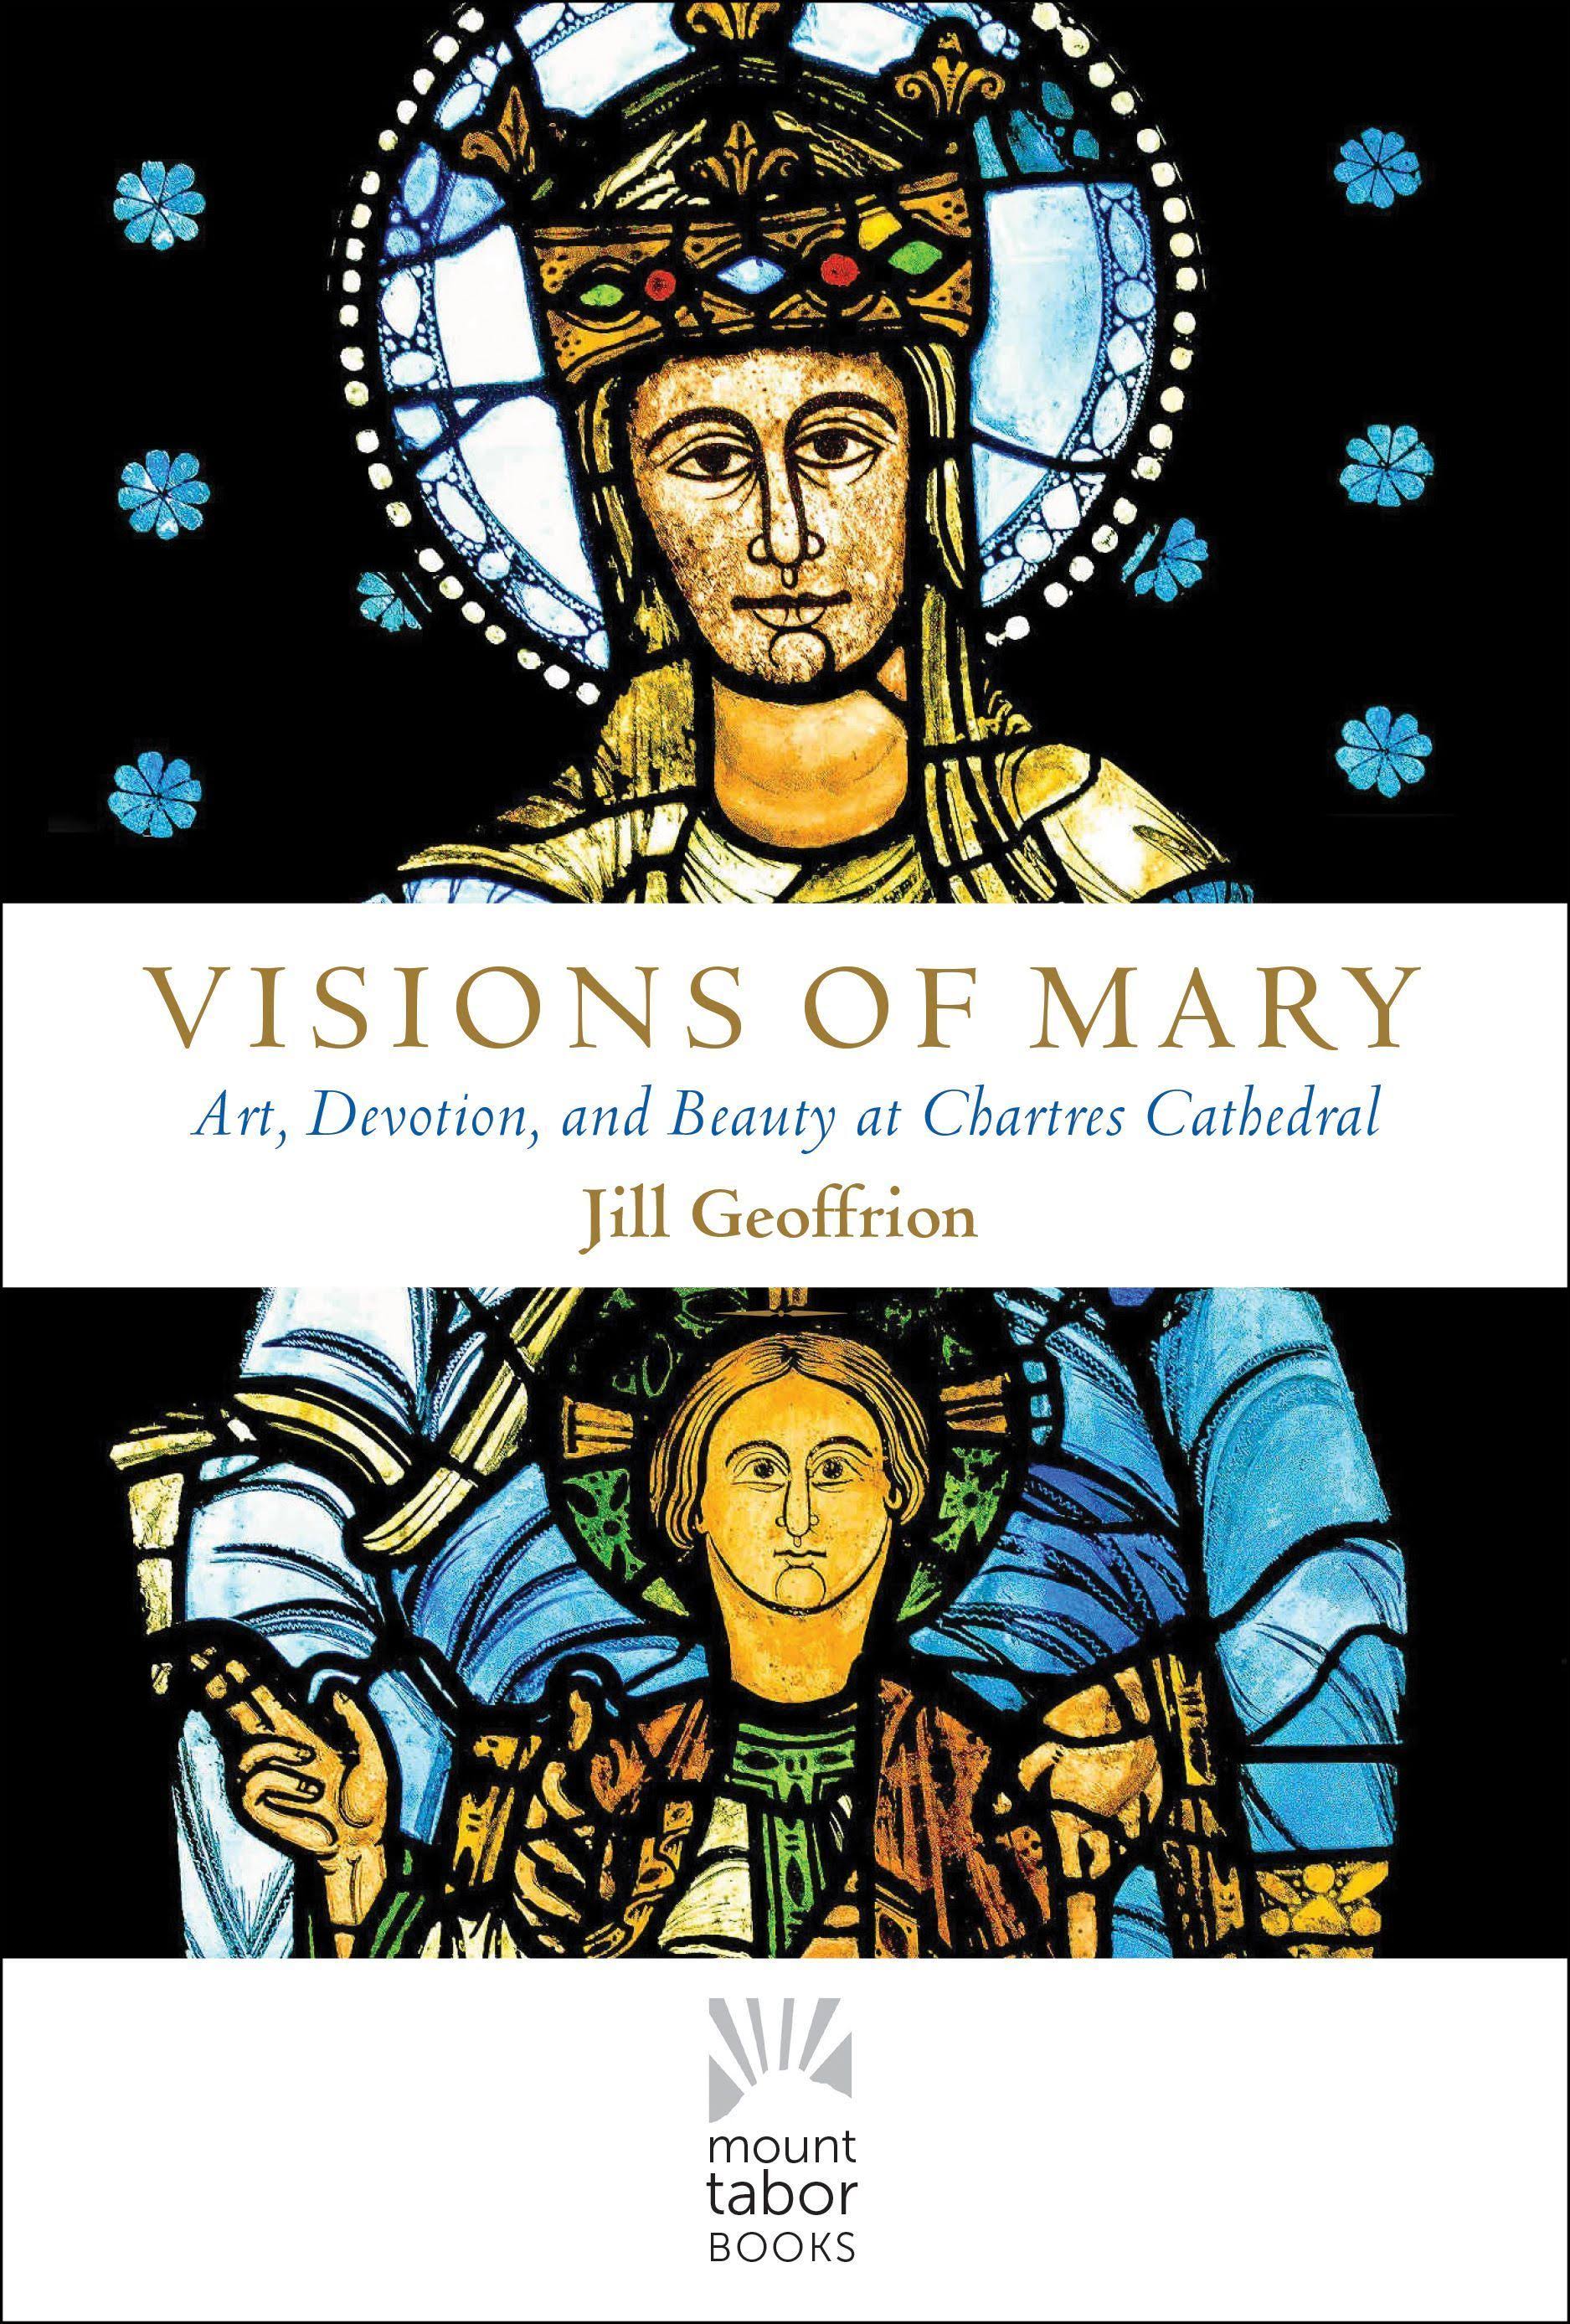 Visions of Mary: Art, Devotion, and Beauty at Chartres Cathedral [Book]